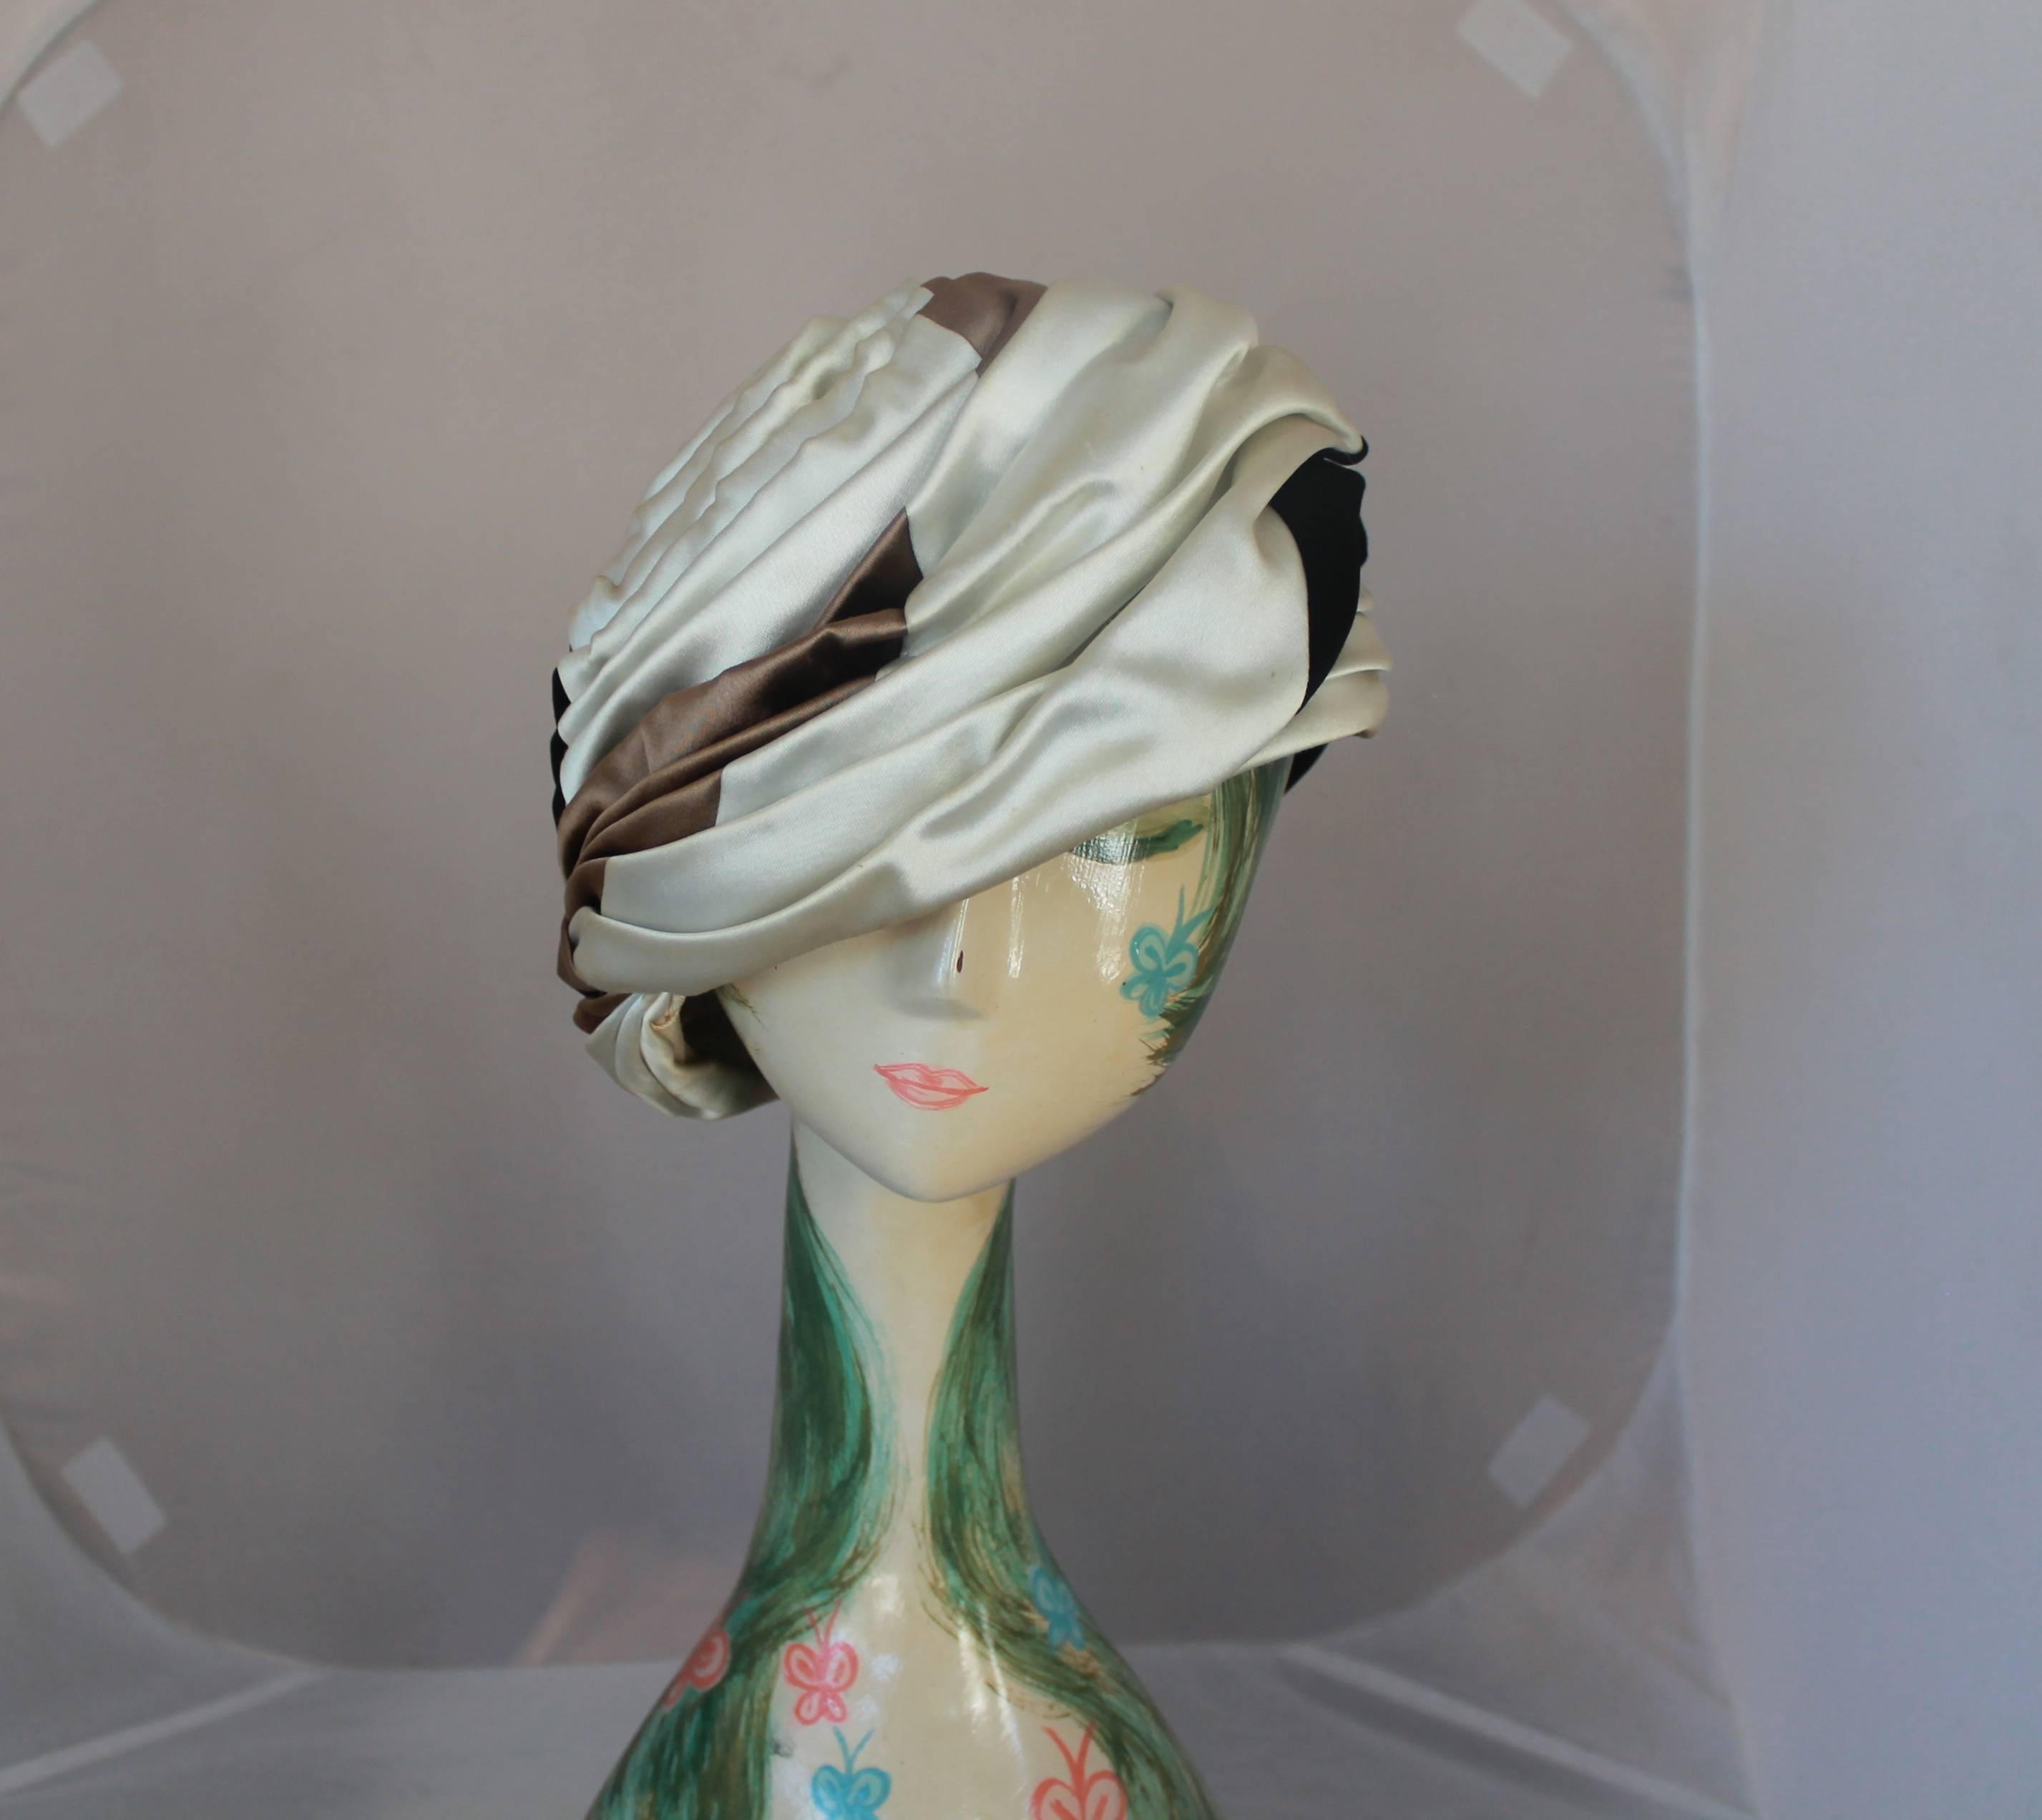 Christian Dior 1960's Vintage Black, Brown & Ivory Silk Turban Hat. This hat is in good vintage condition with some wear on the inside and a minor speck on the top section on the ivory. It is otherwise in great shape and is perfect for collectors.